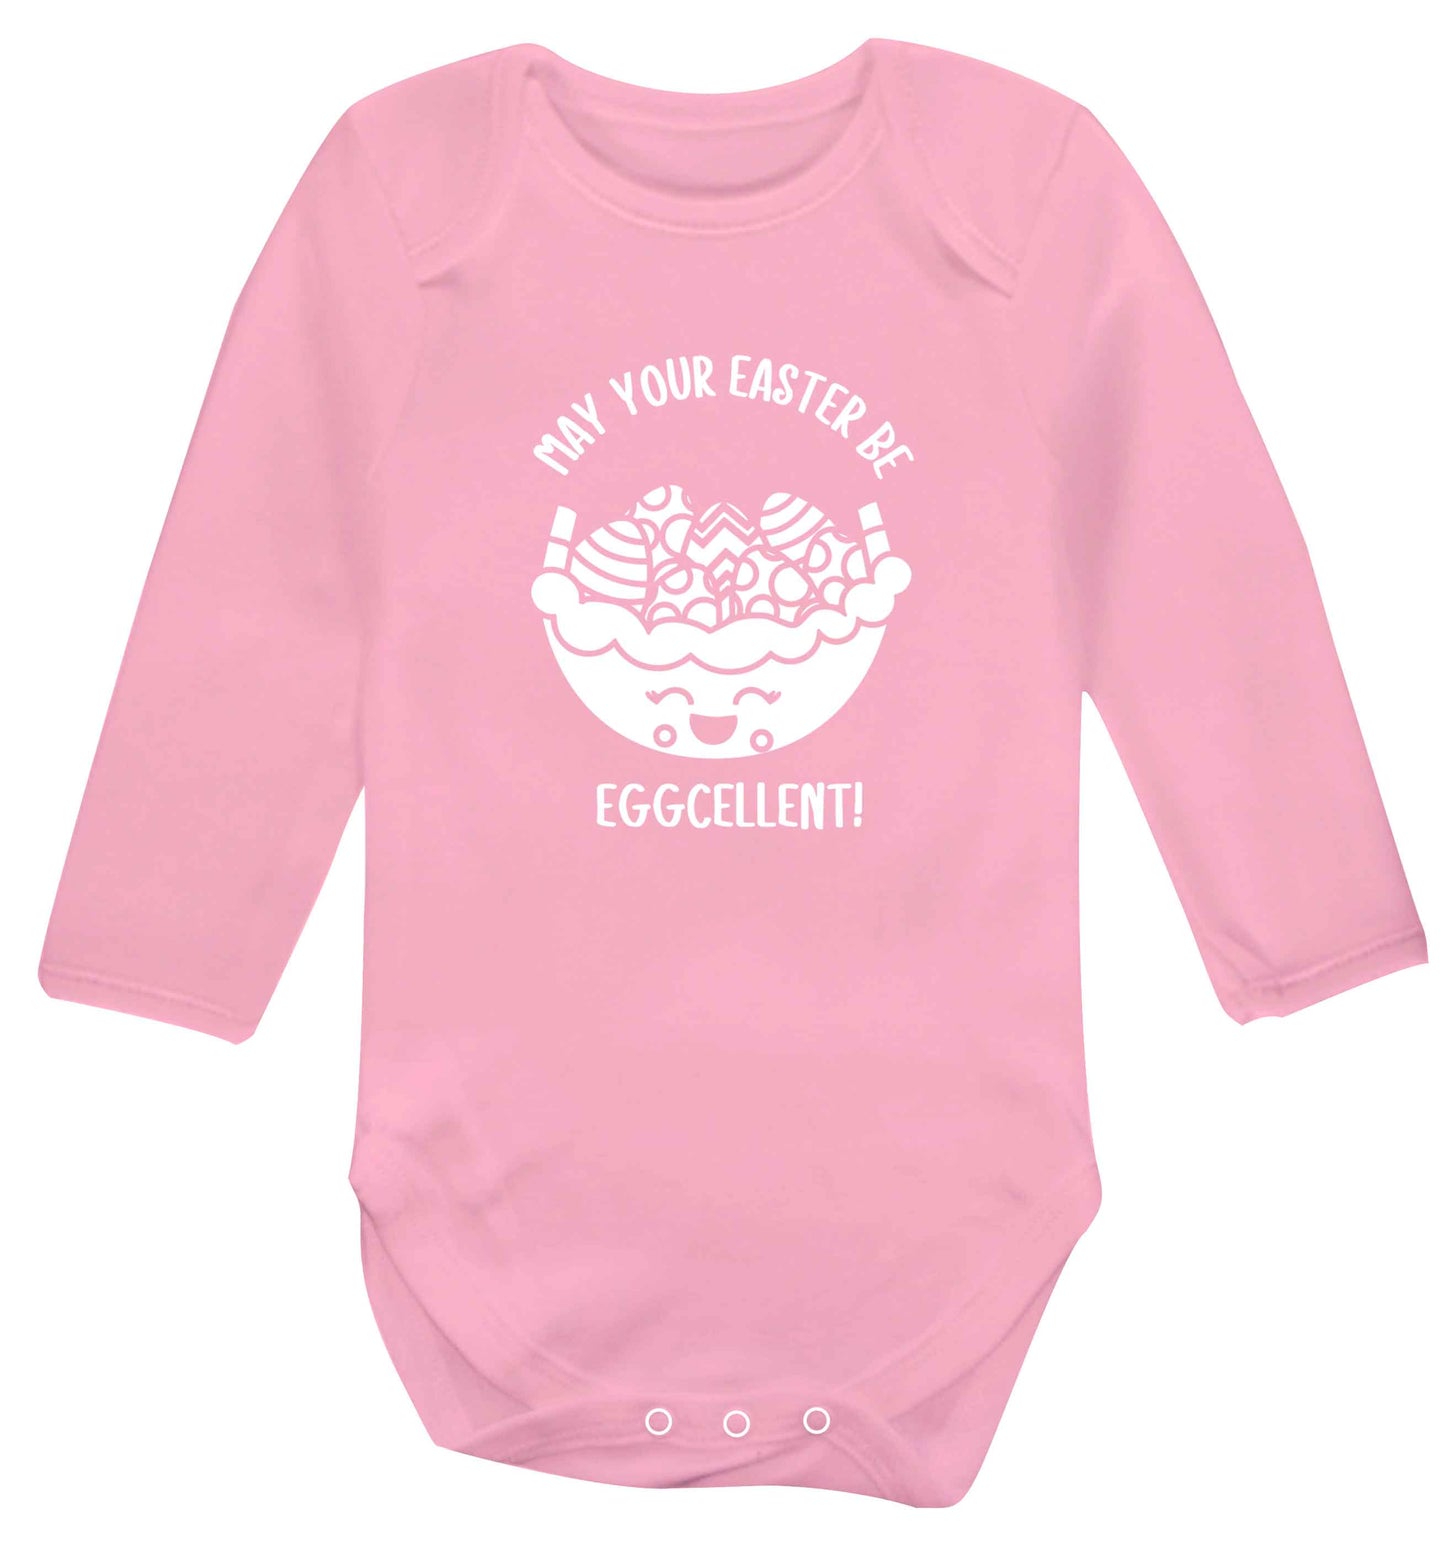 May your Easter be eggcellent baby vest long sleeved pale pink 6-12 months